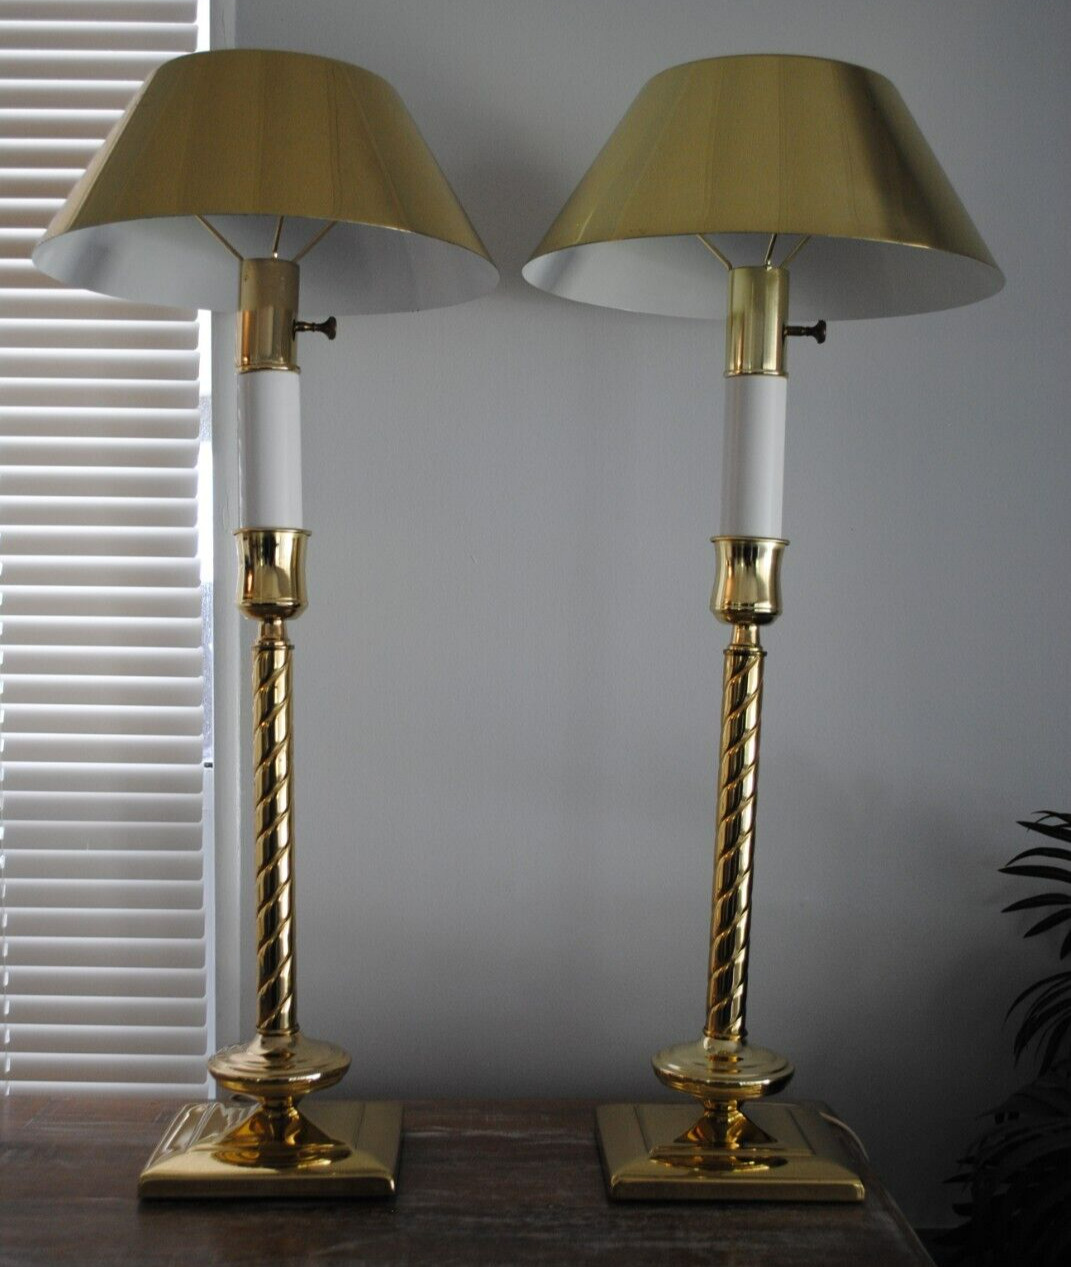 PAIR OF VINTAGE BRASS TABLE LAMPS WITH DECORATIVE LEG AND BRASS SHADES